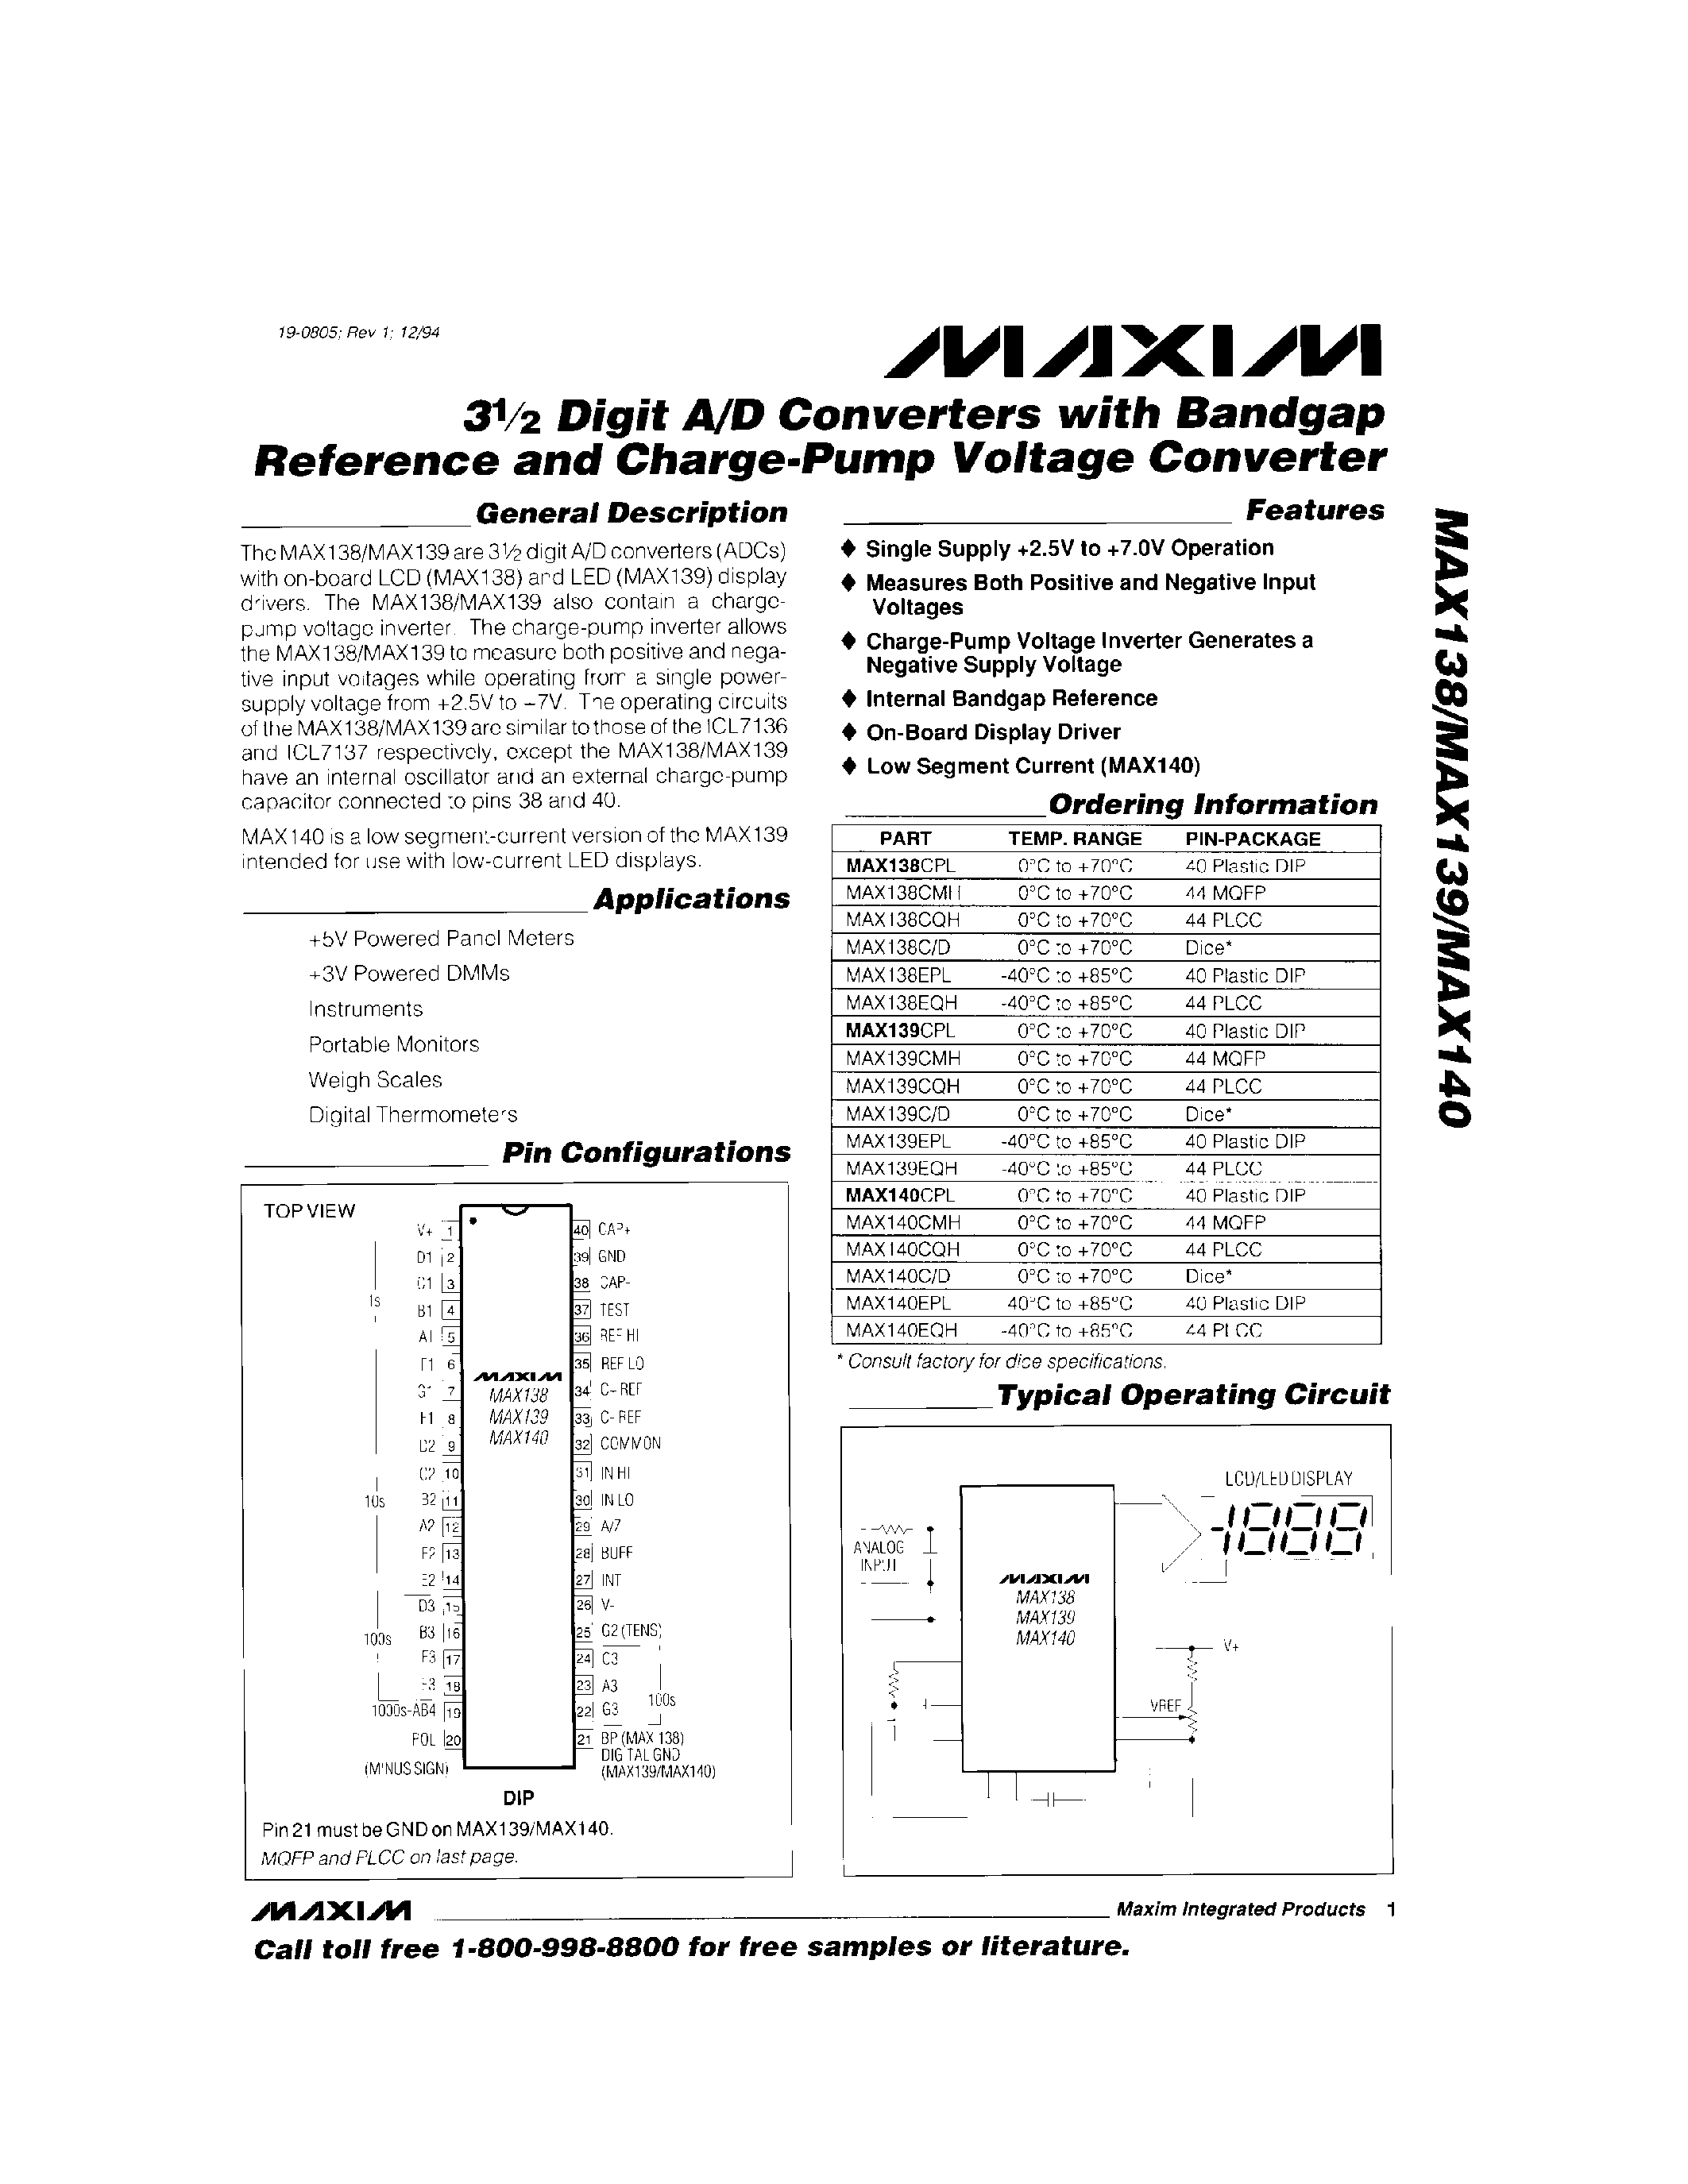 Datasheet MAX139C/D - 3Digit A/D Converters with Bandgap Refrence and Charge-Pump Voltage Converter page 1